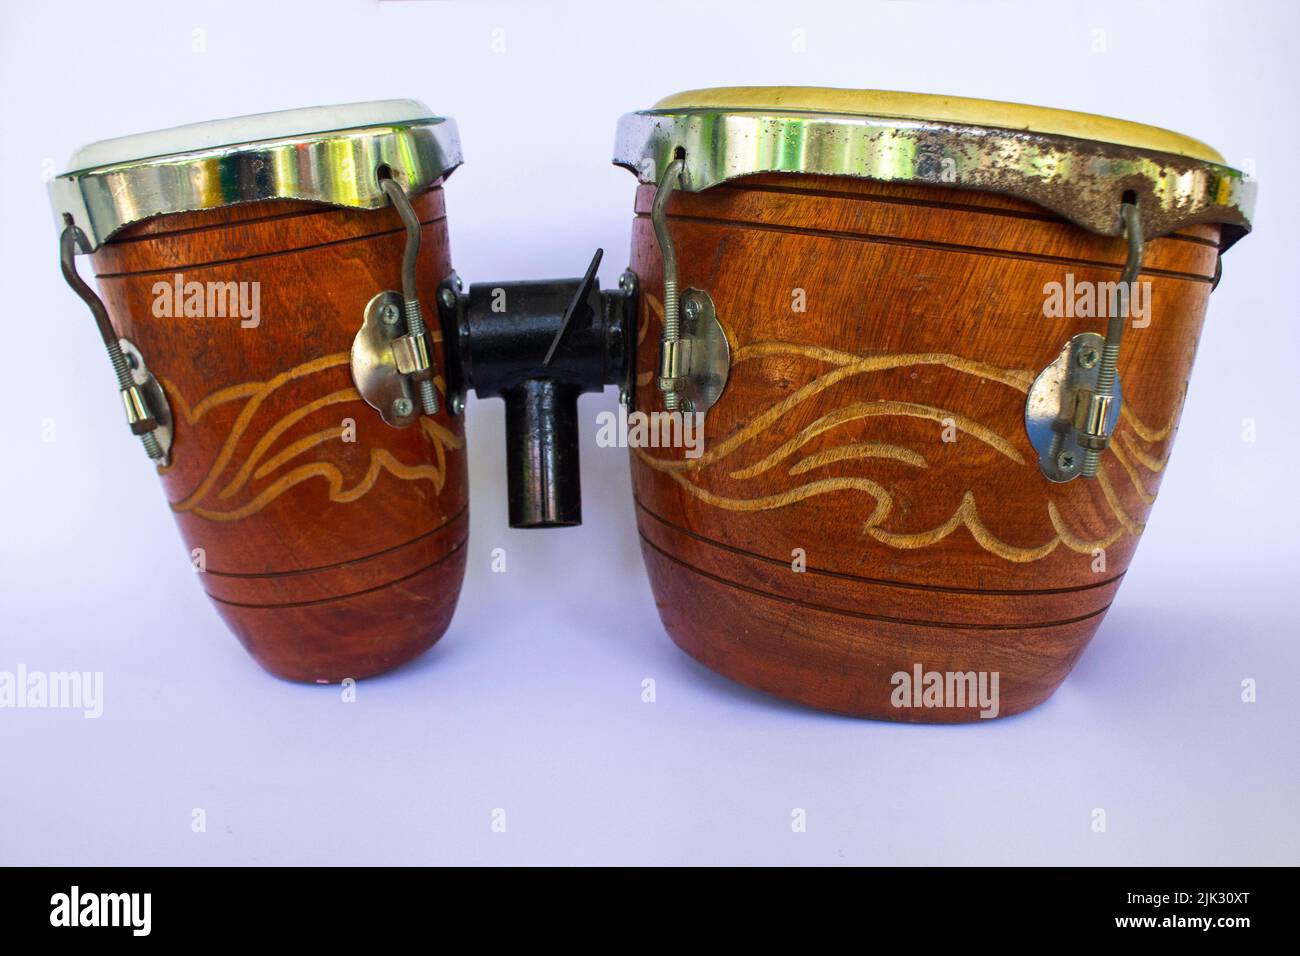 kendang , ketipung isolated on white background. Kendhang javanese Kendhang, TausugBajau Maranao Gandang ketipung is a two-headed drum used from indon Stock Photo